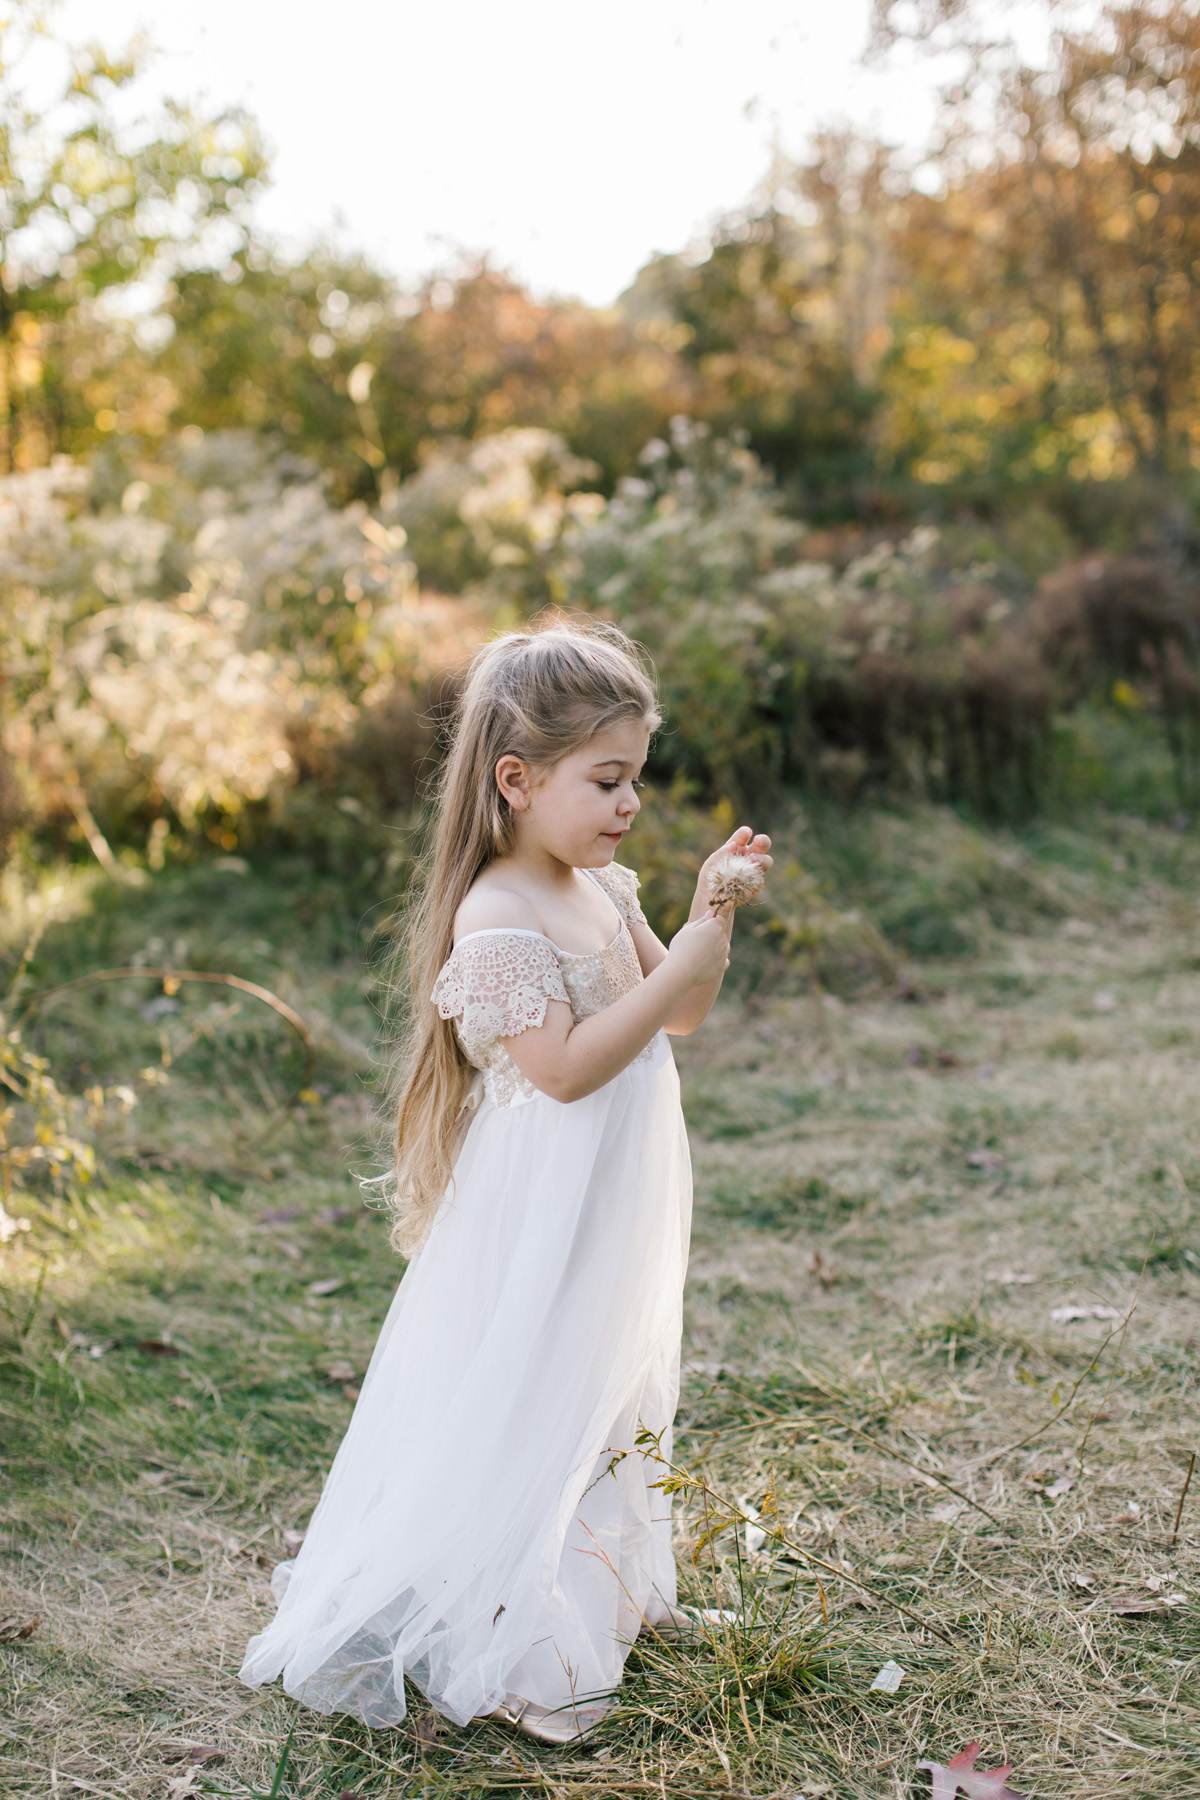 Little girl 'finding the light' and playing with a flower